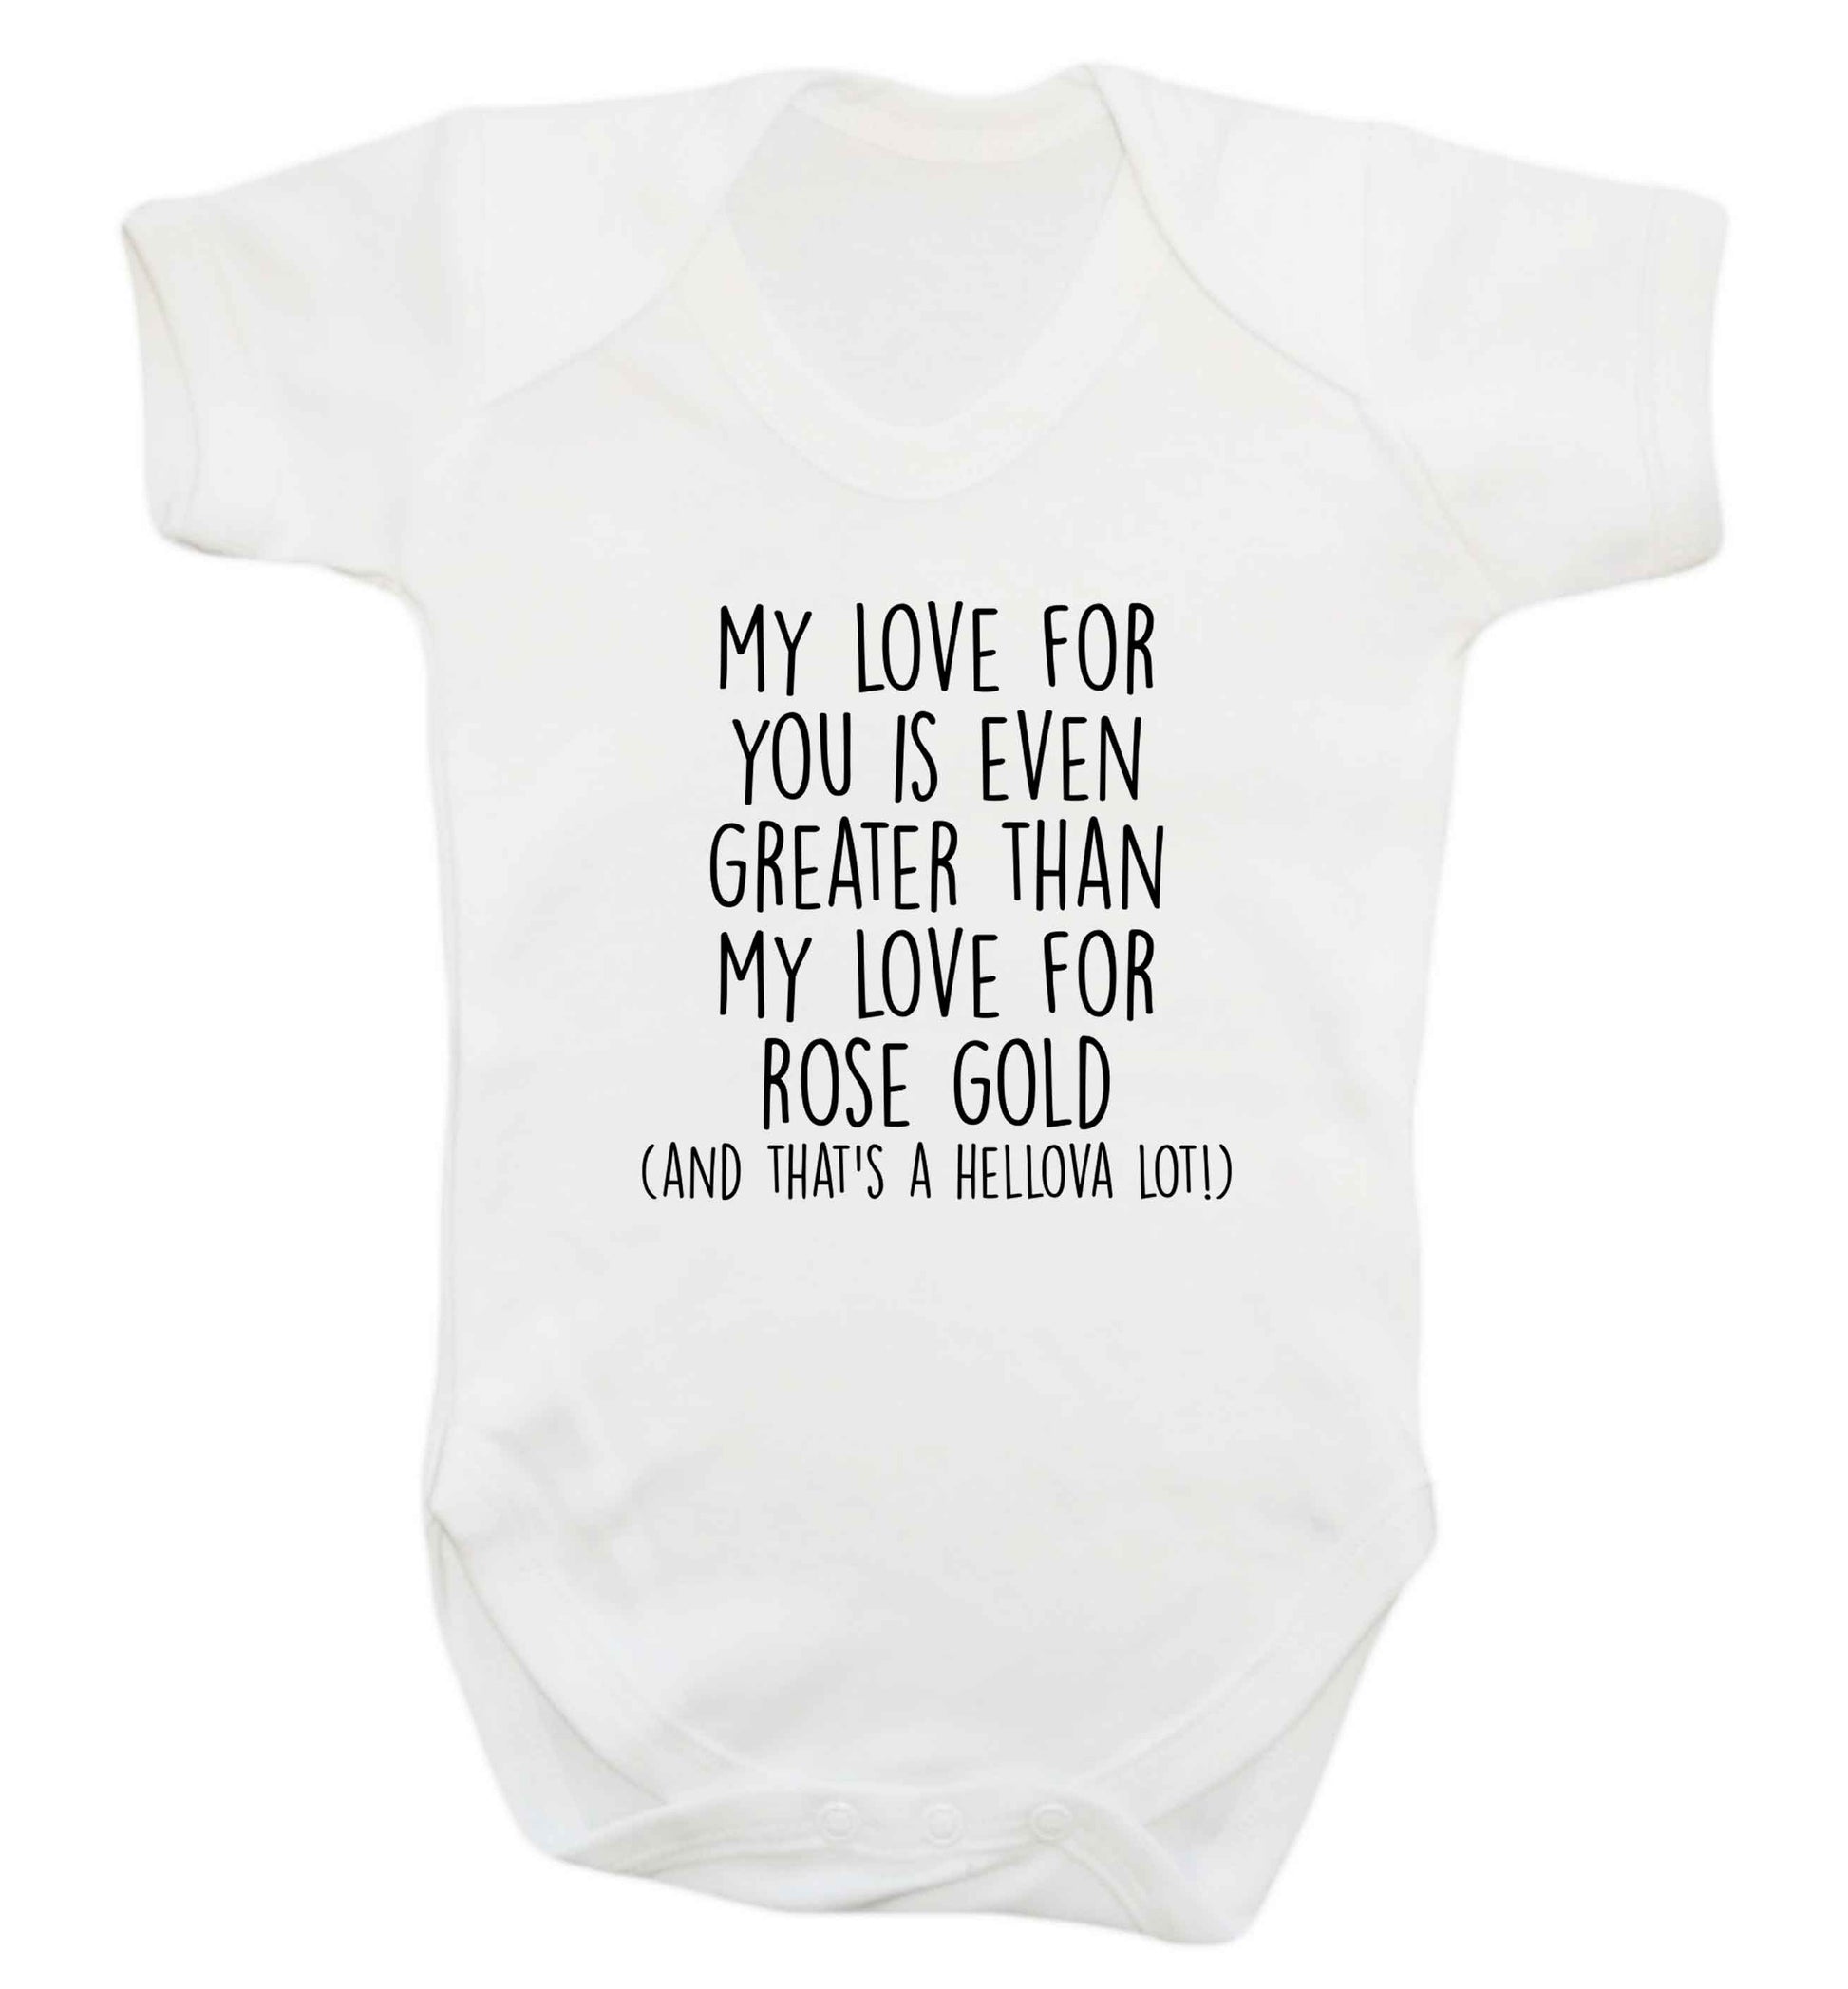 My love for you is even greater than my love for rose gold (and that's a hellova lot) baby vest white 18-24 months